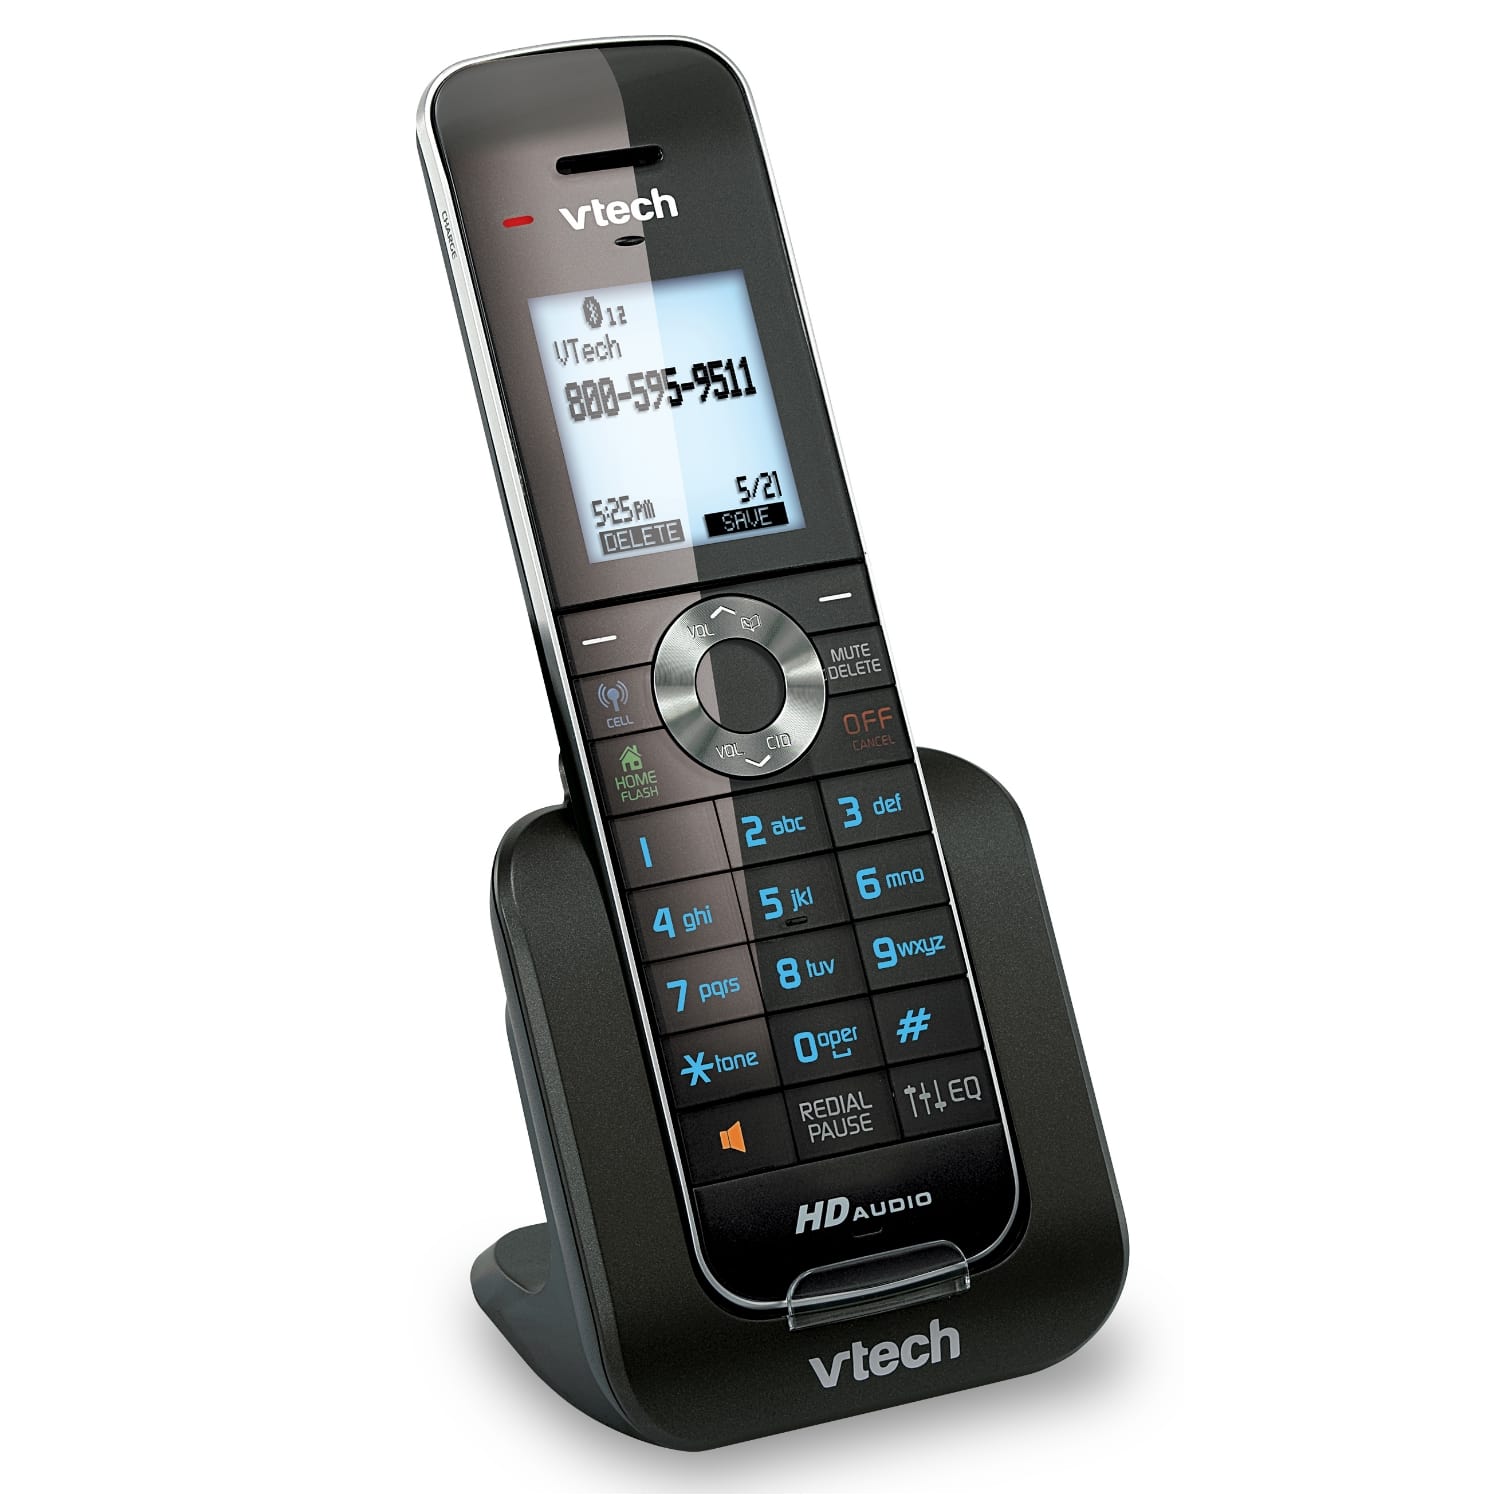 8 Handset Connect to Cell™ Answering System with Caller ID/Call Waiting - view 7